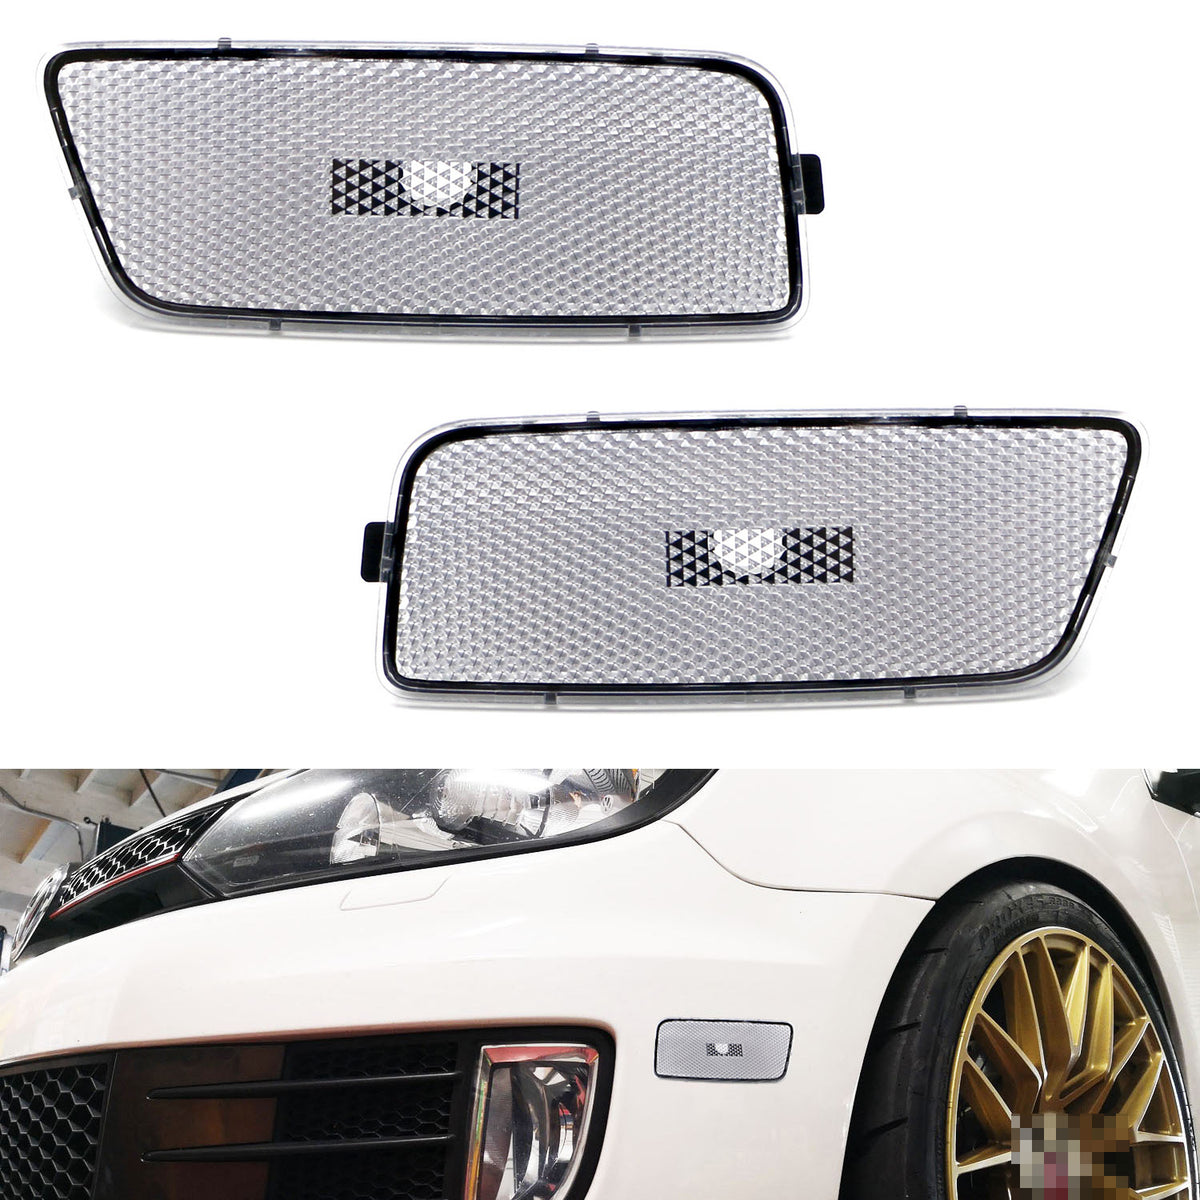 For Golf 7 Mk7 2014 2015 2016 2017 Car Headlight Cover Clear Lens Headlamp  Lampshade Shell (left Si